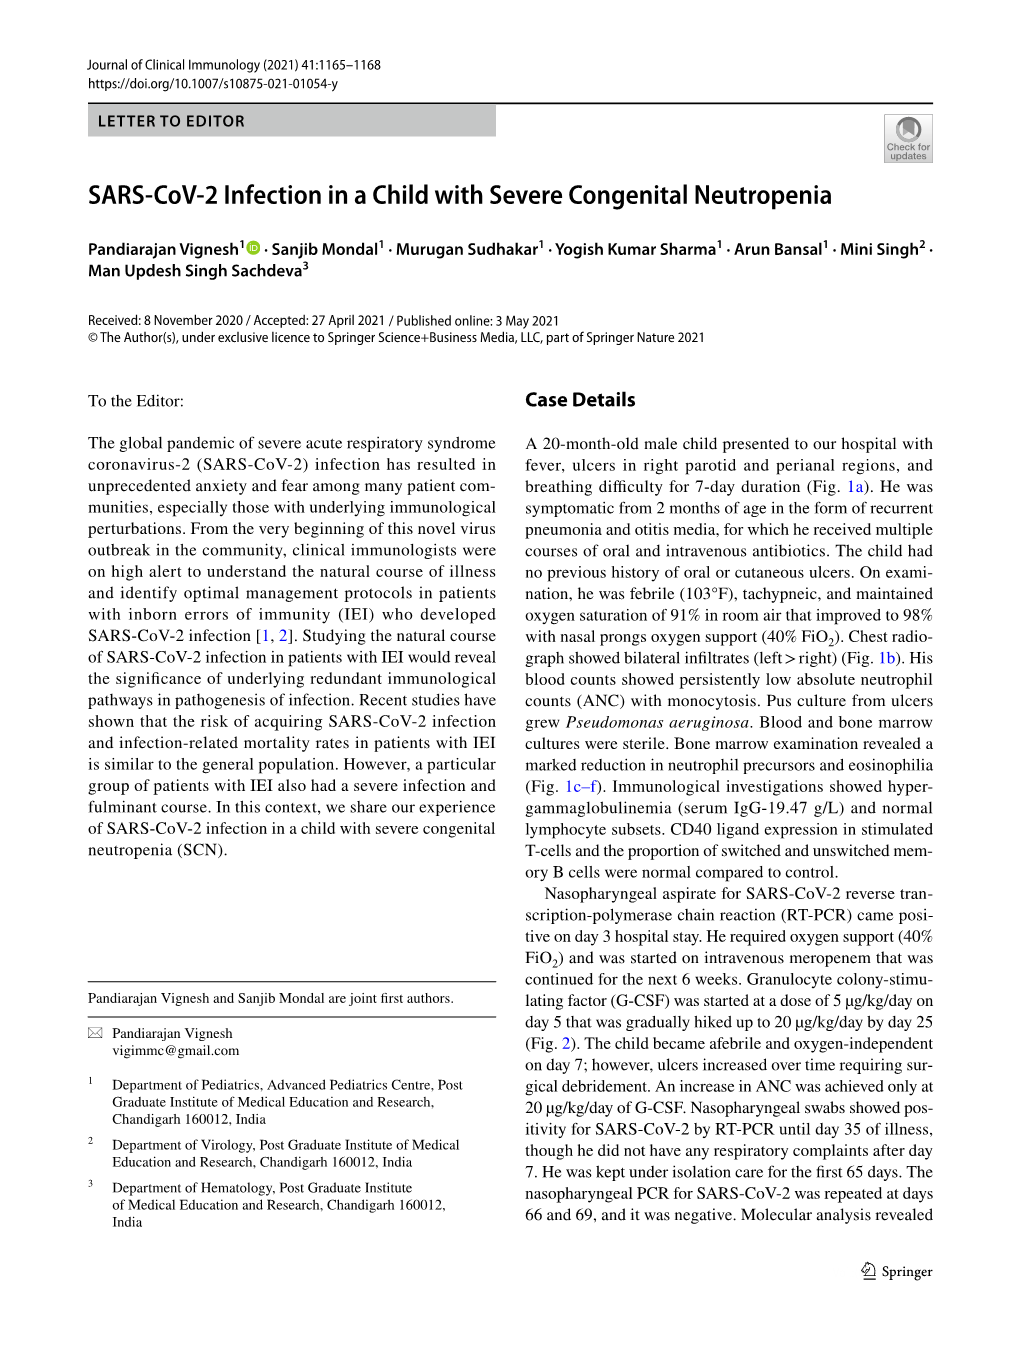 SARS-Cov-2 Infection in a Child with Severe Congenital Neutropenia